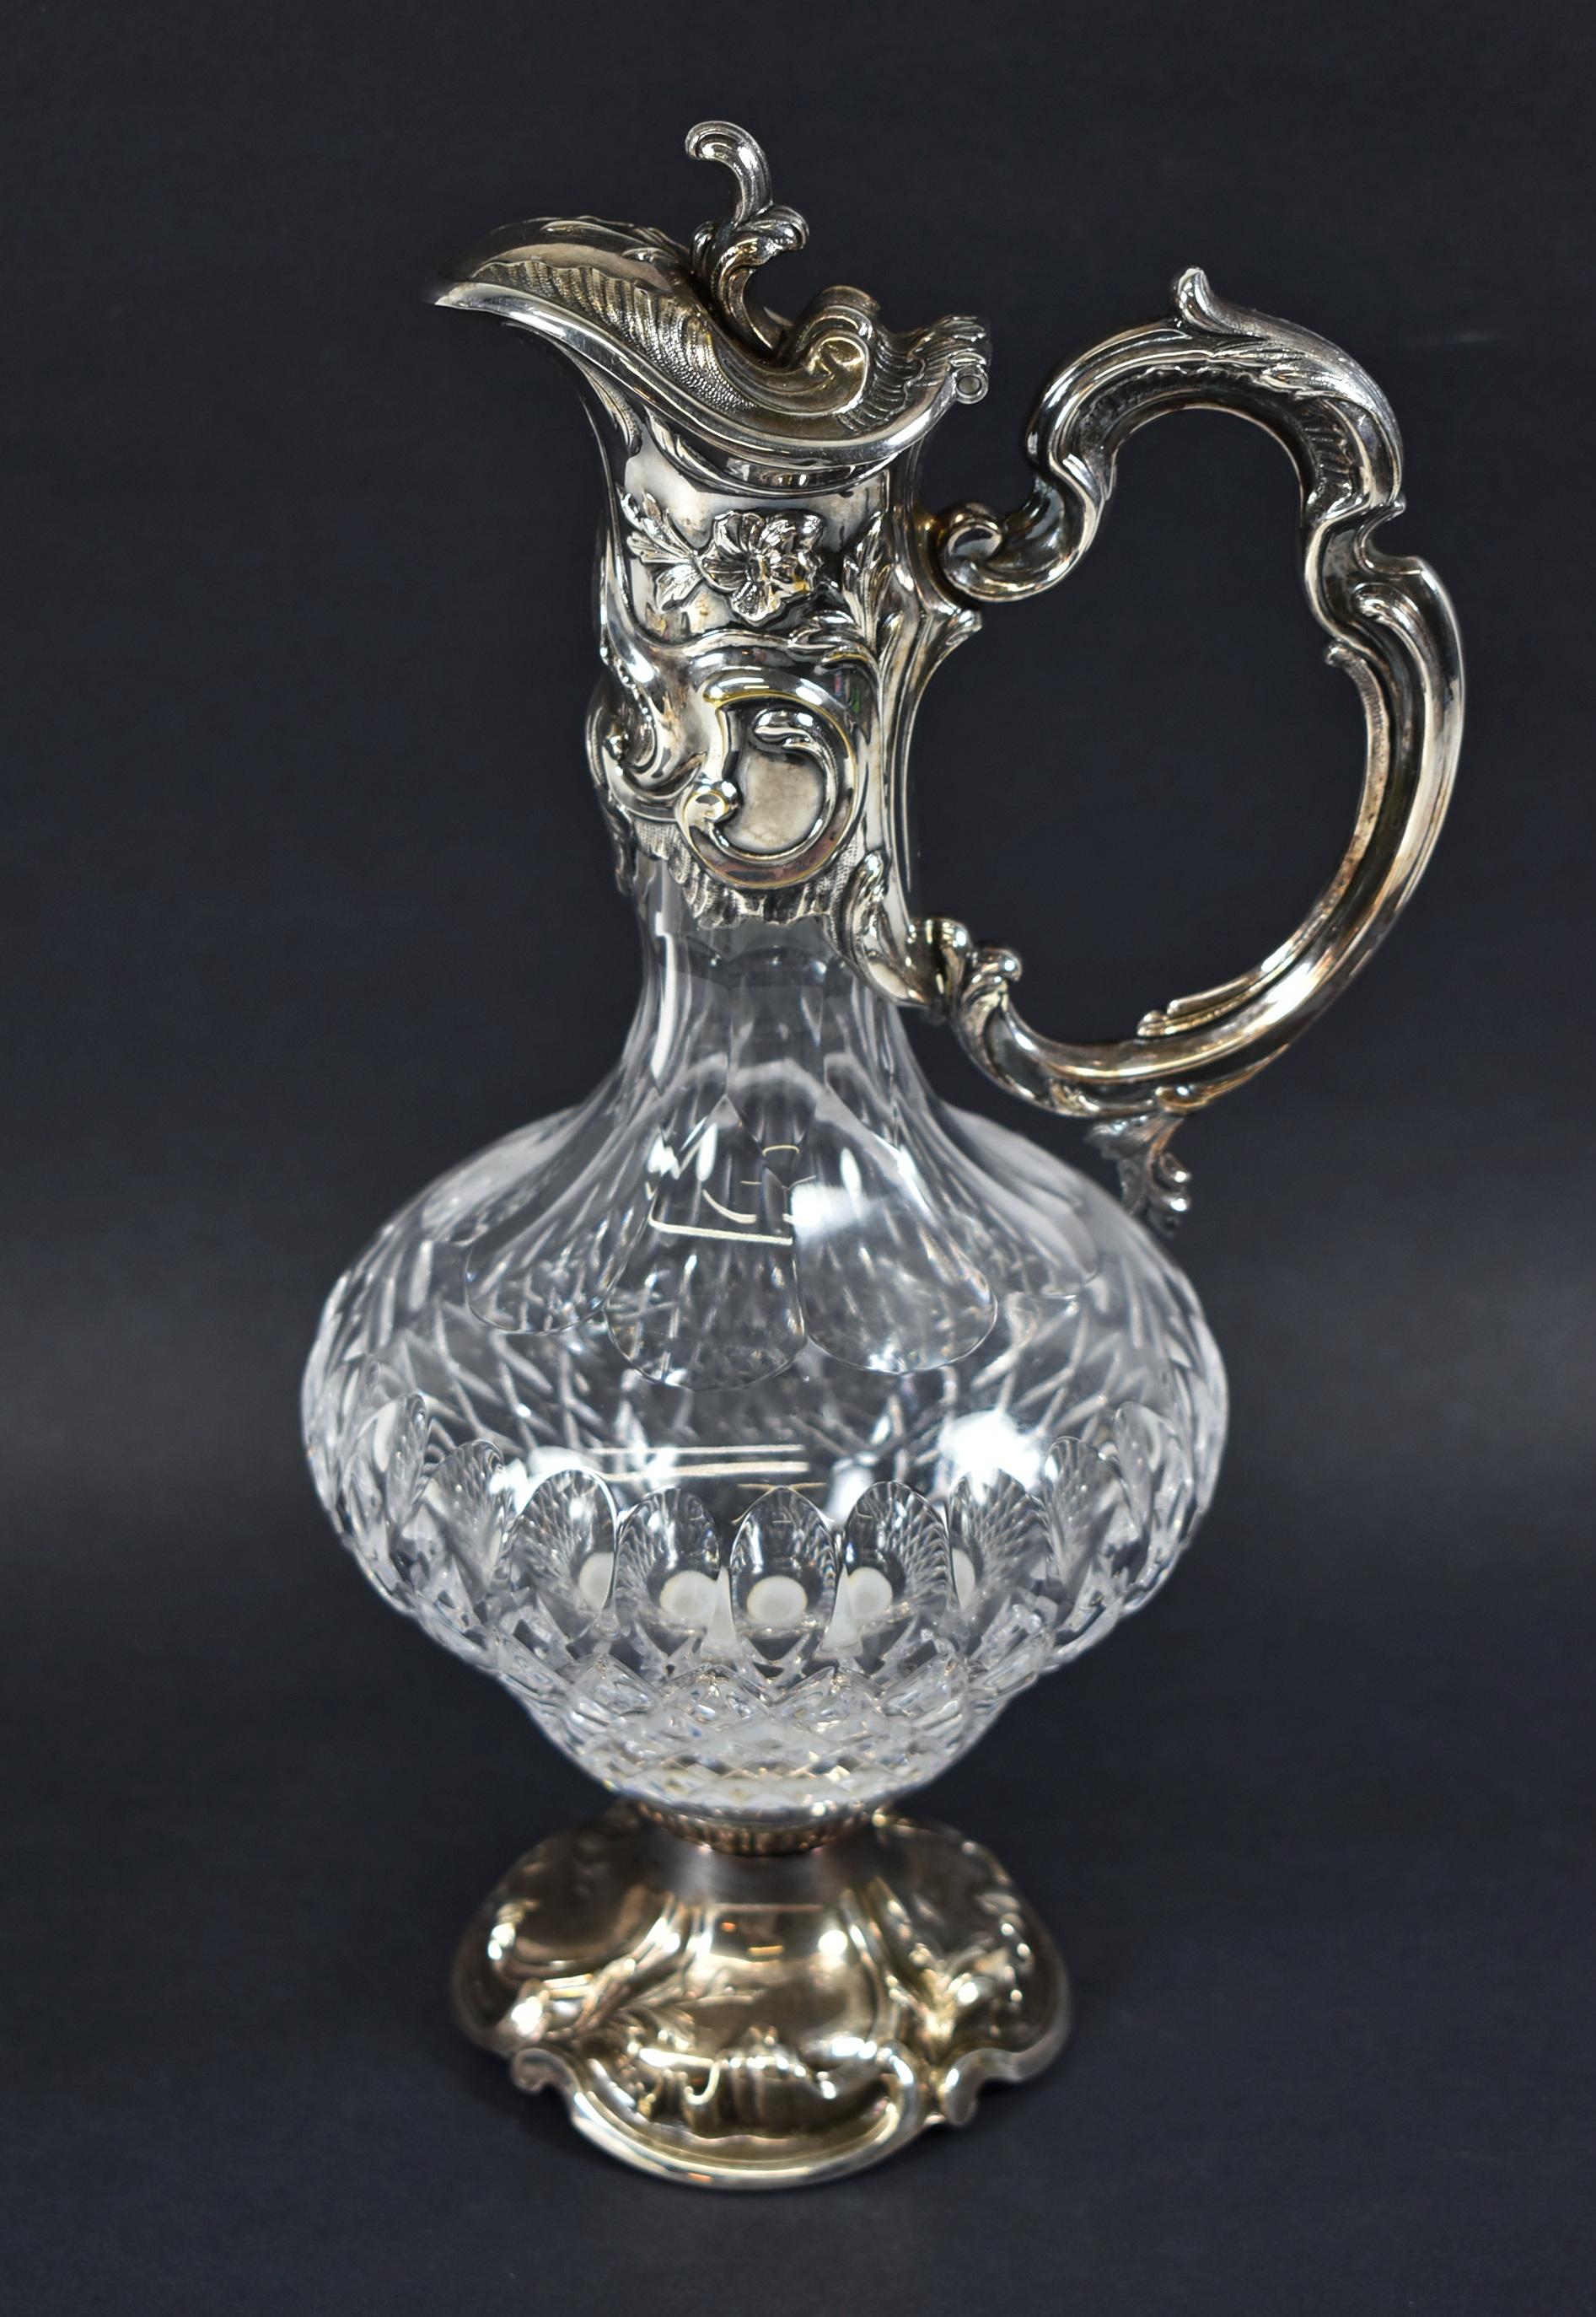 Antique silver plate Art Nouveau Topazio silver plate and cut glass pitcher / caraffe / claret. Holds 28 fl ounces. Very good condition. Dimensions: 7